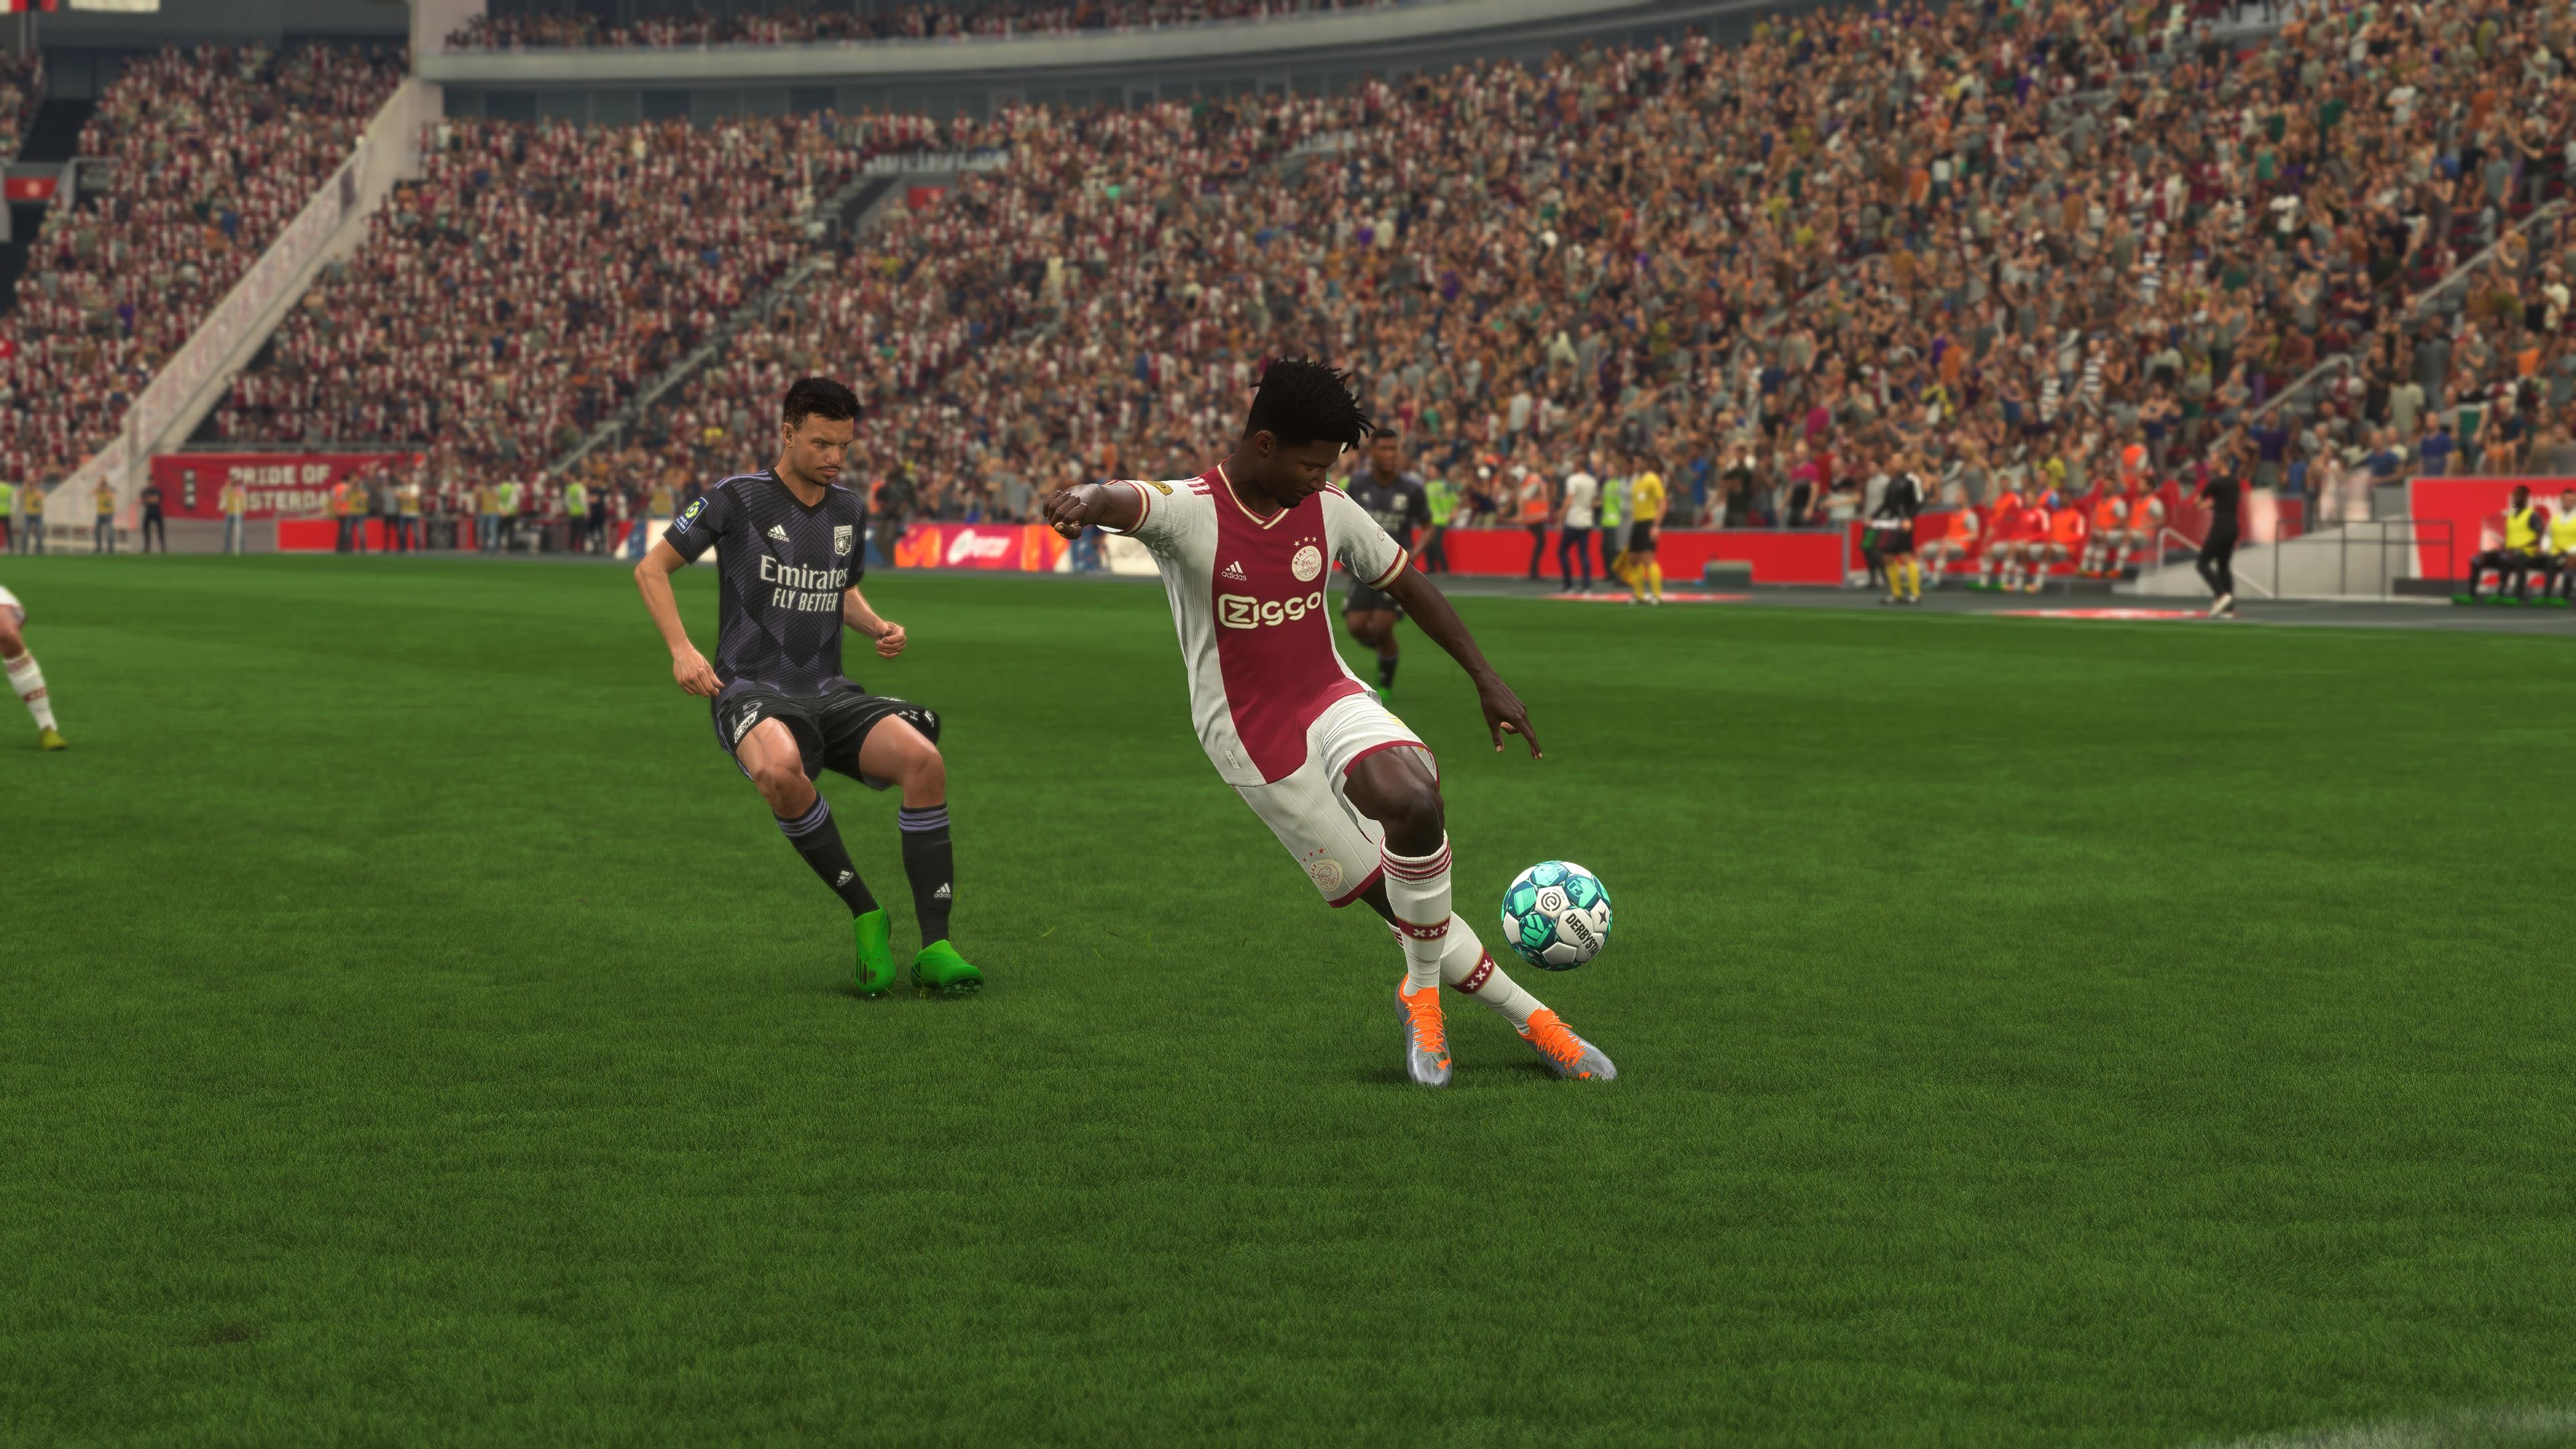 Mohammed Kudus performing a rabona shot in FIFA 23